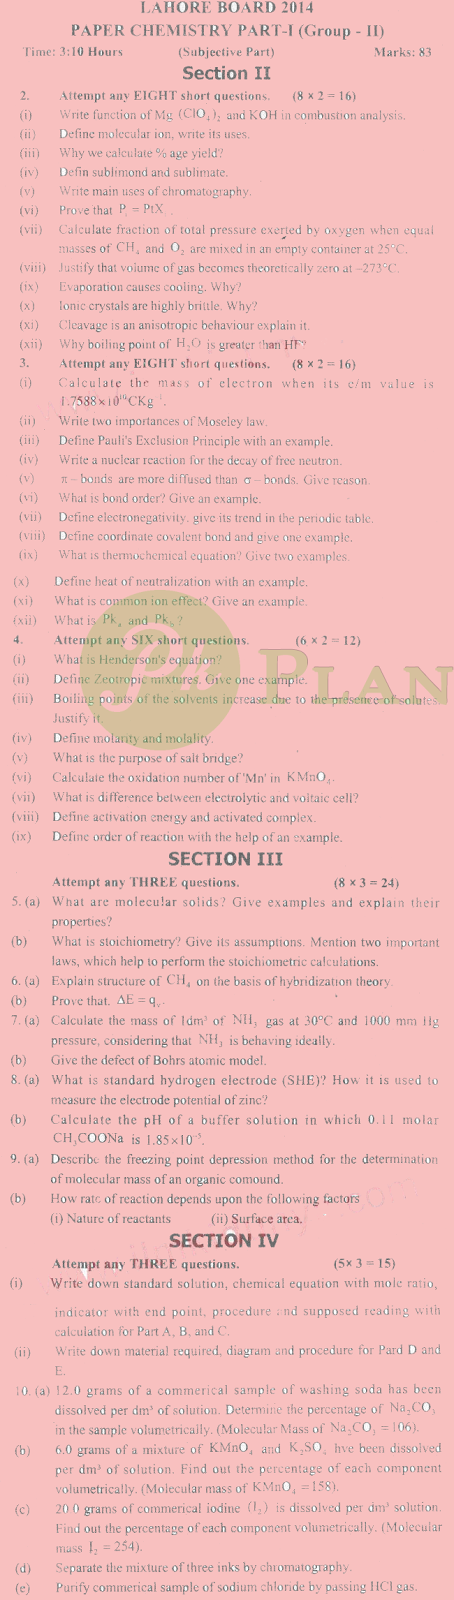 Past Papers of Intermediate Part 1 Chemistry Lahore Board 2014